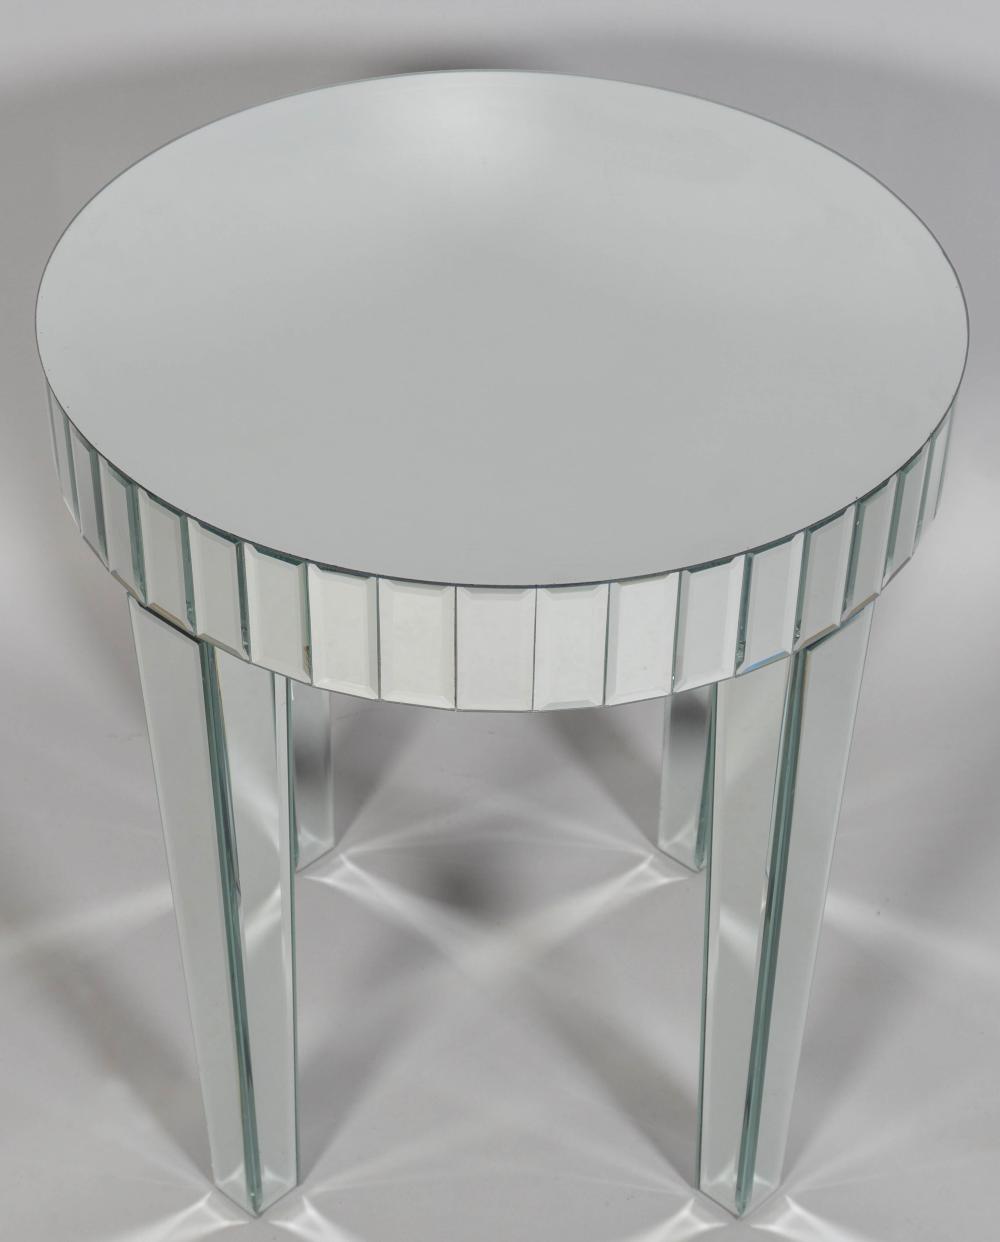 CONTEMPORARY MIRRORED SIDE TABLE 33cccc